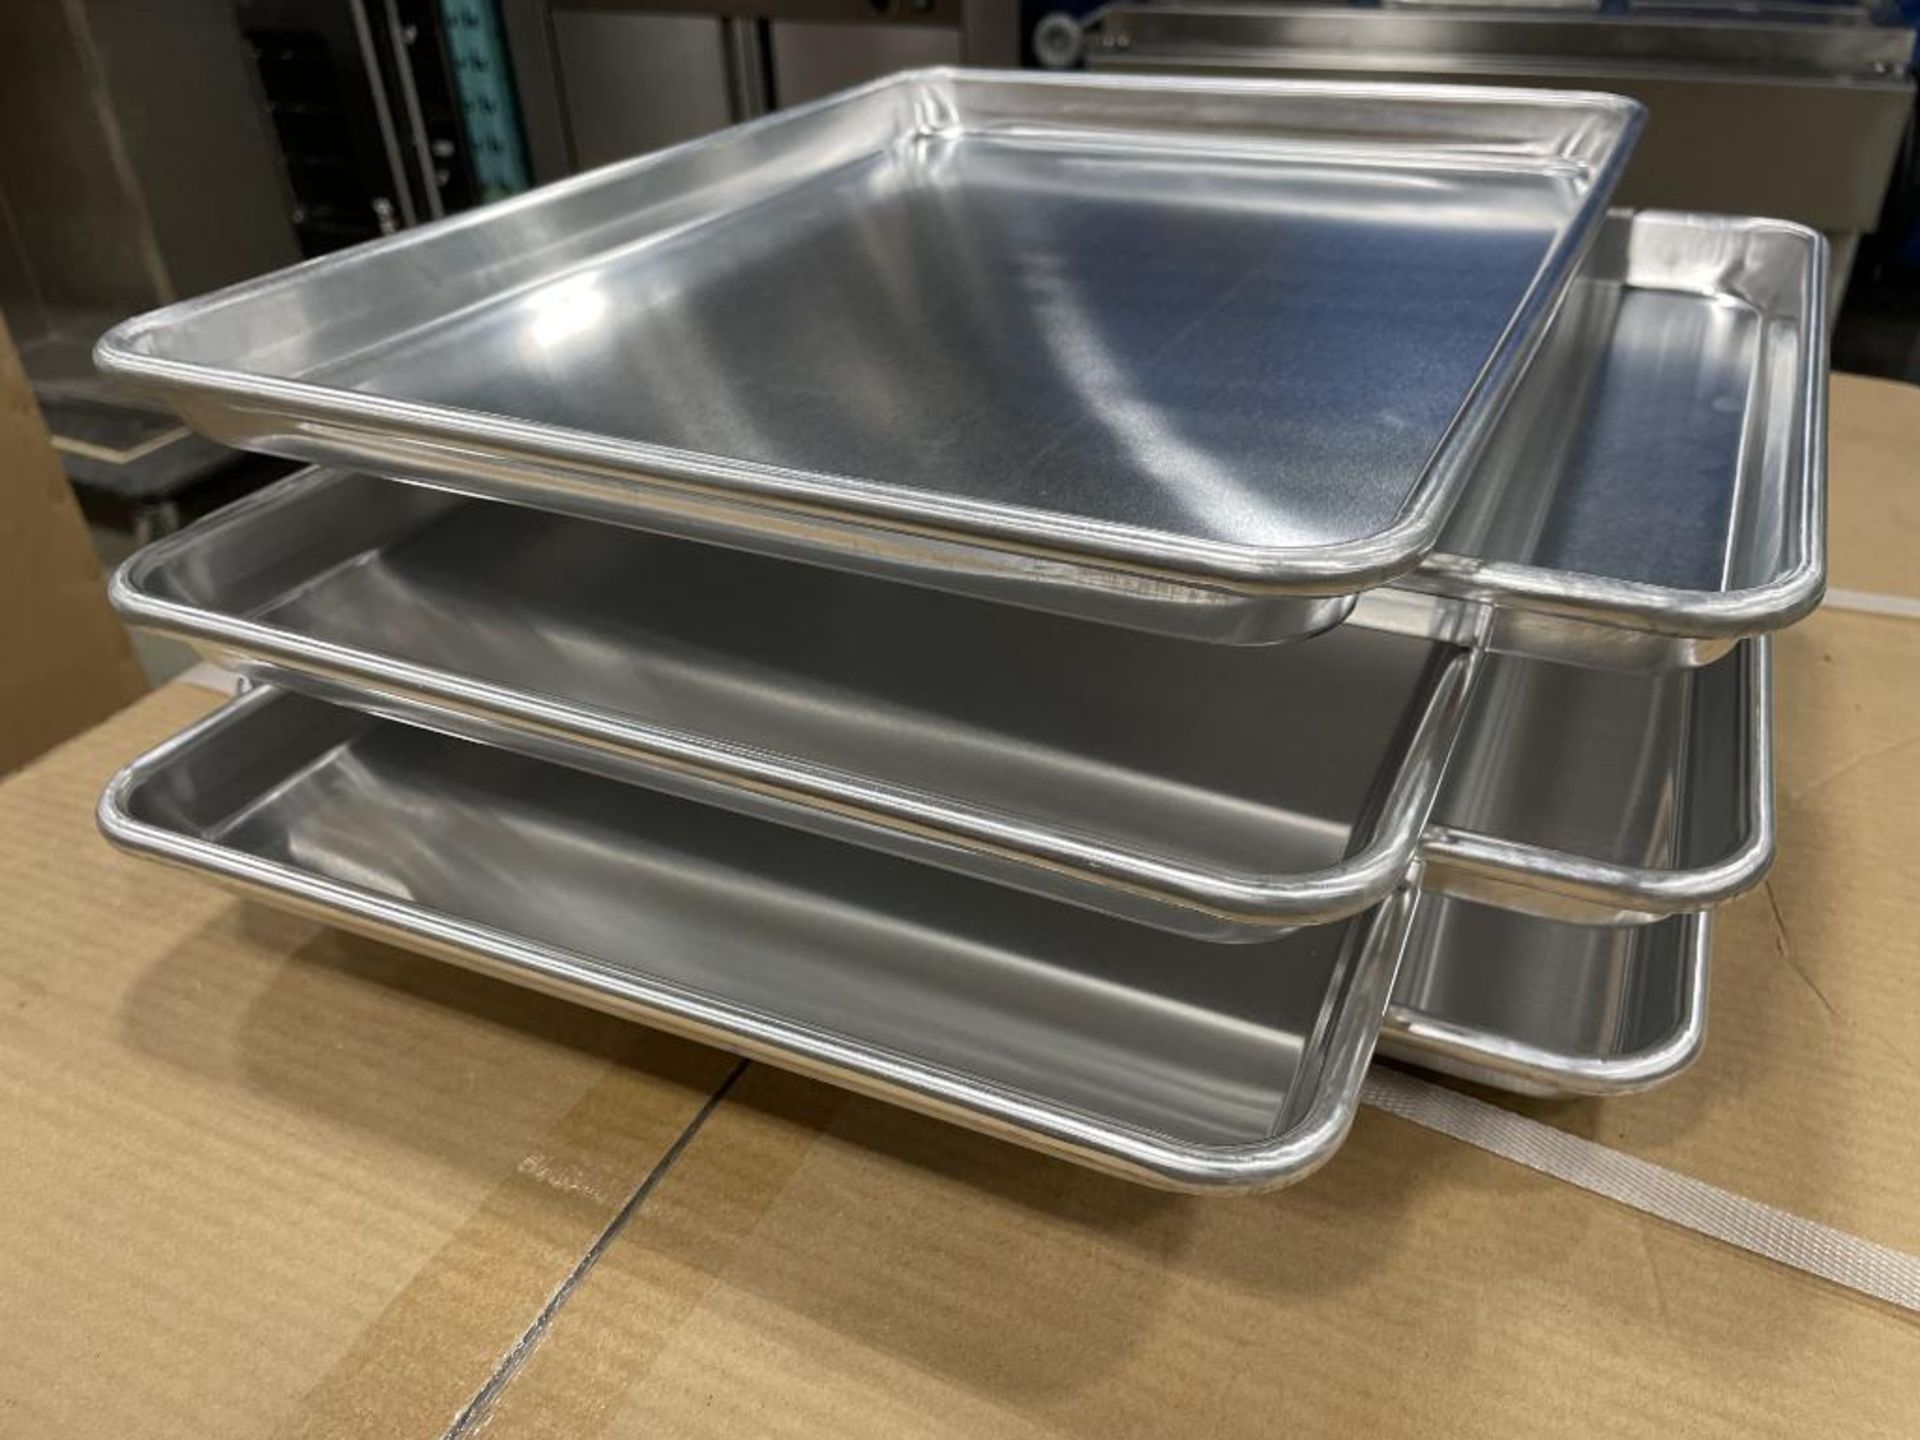 LOT OF (6) HALF SIZE BUN PANS, UPDATE ABNP-50 - NEW - Image 3 of 6